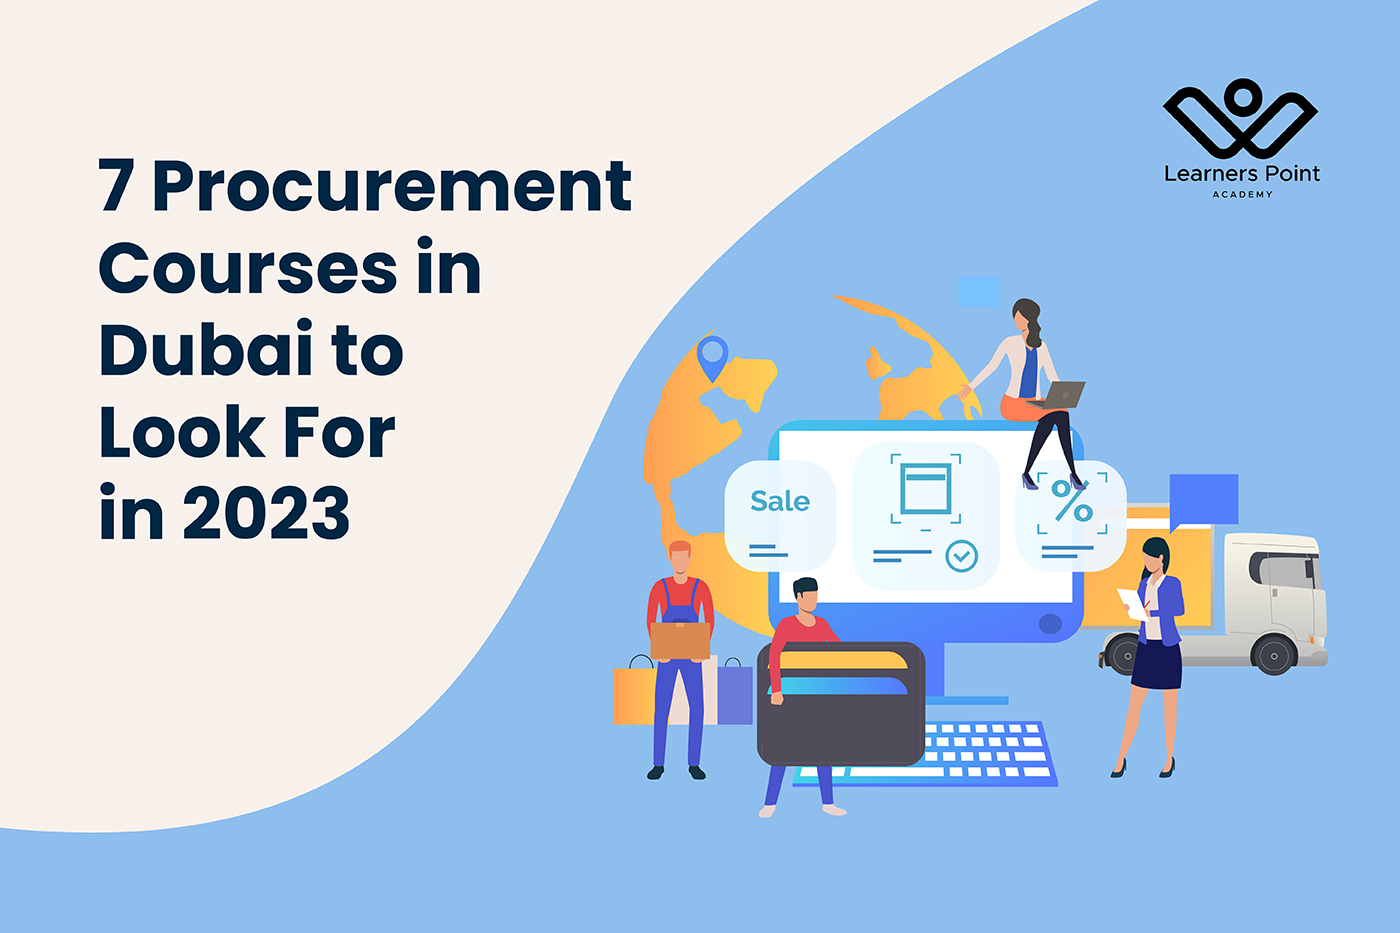 7 Procurement Courses in Dubai to Look For in 2023